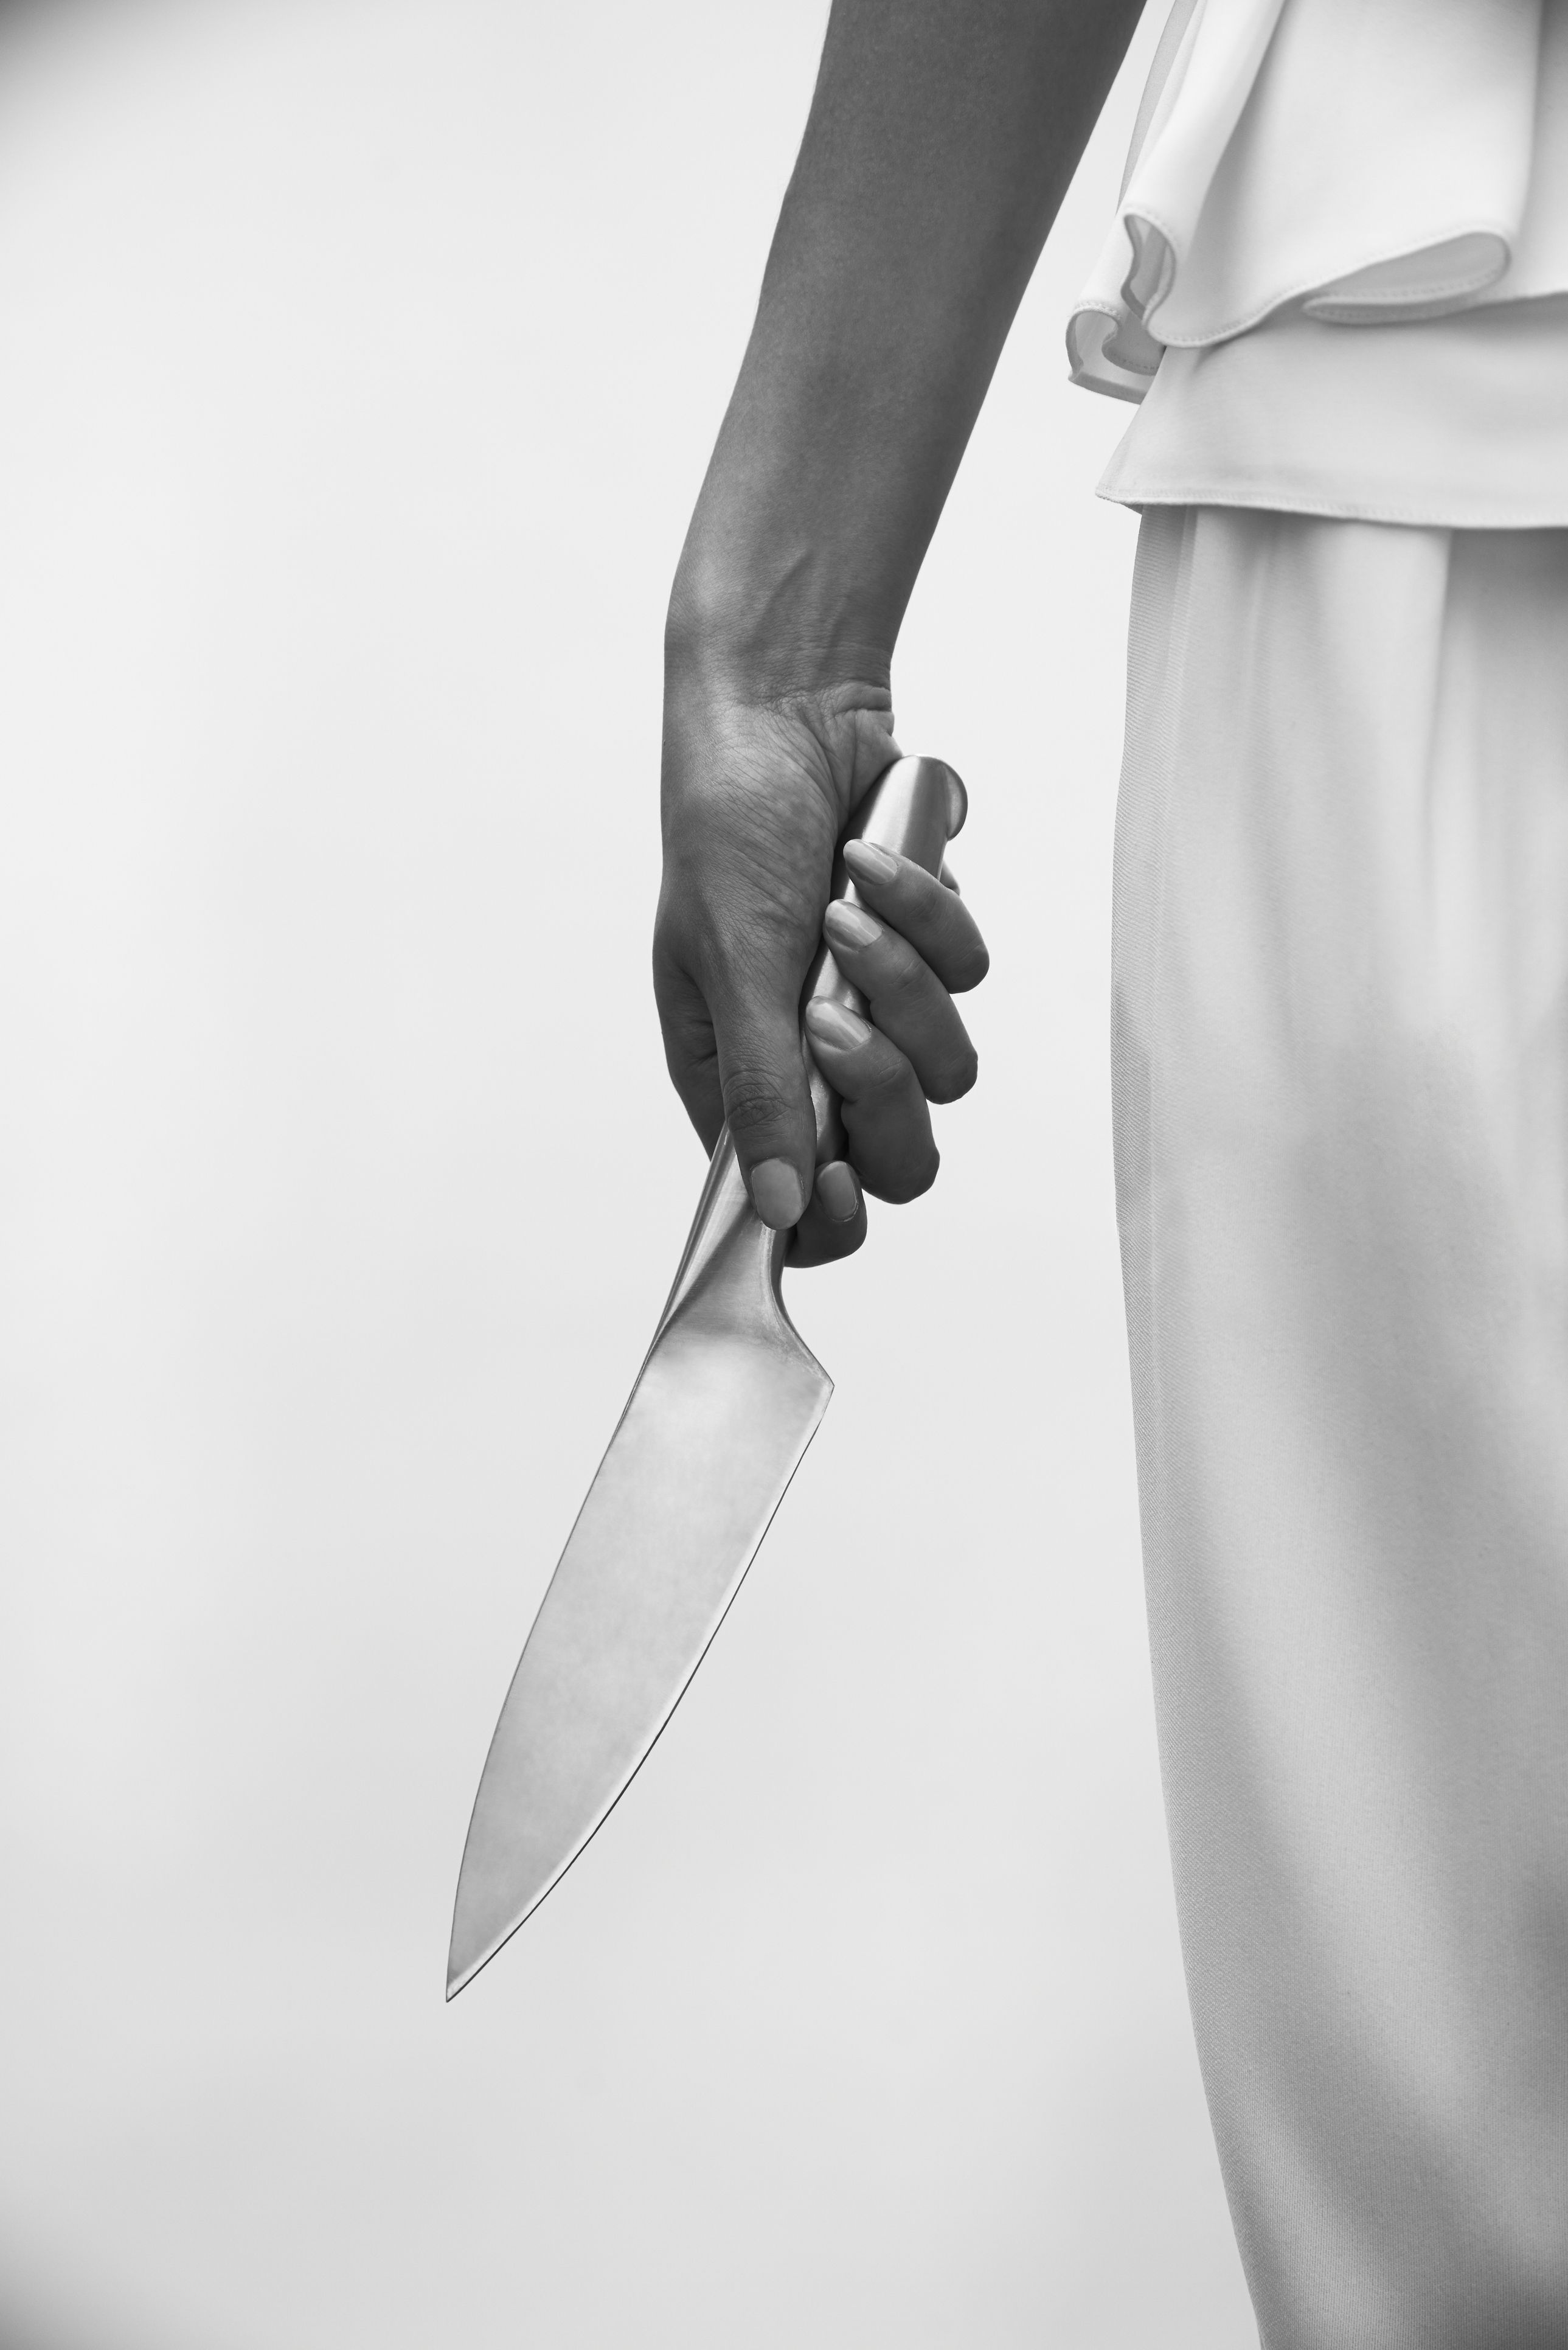 https://hips.hearstapps.com/hmg-prod/images/spooky-image-of-knife-and-womans-hand-high-res-stock-photography-516422143-1541565531.jpg